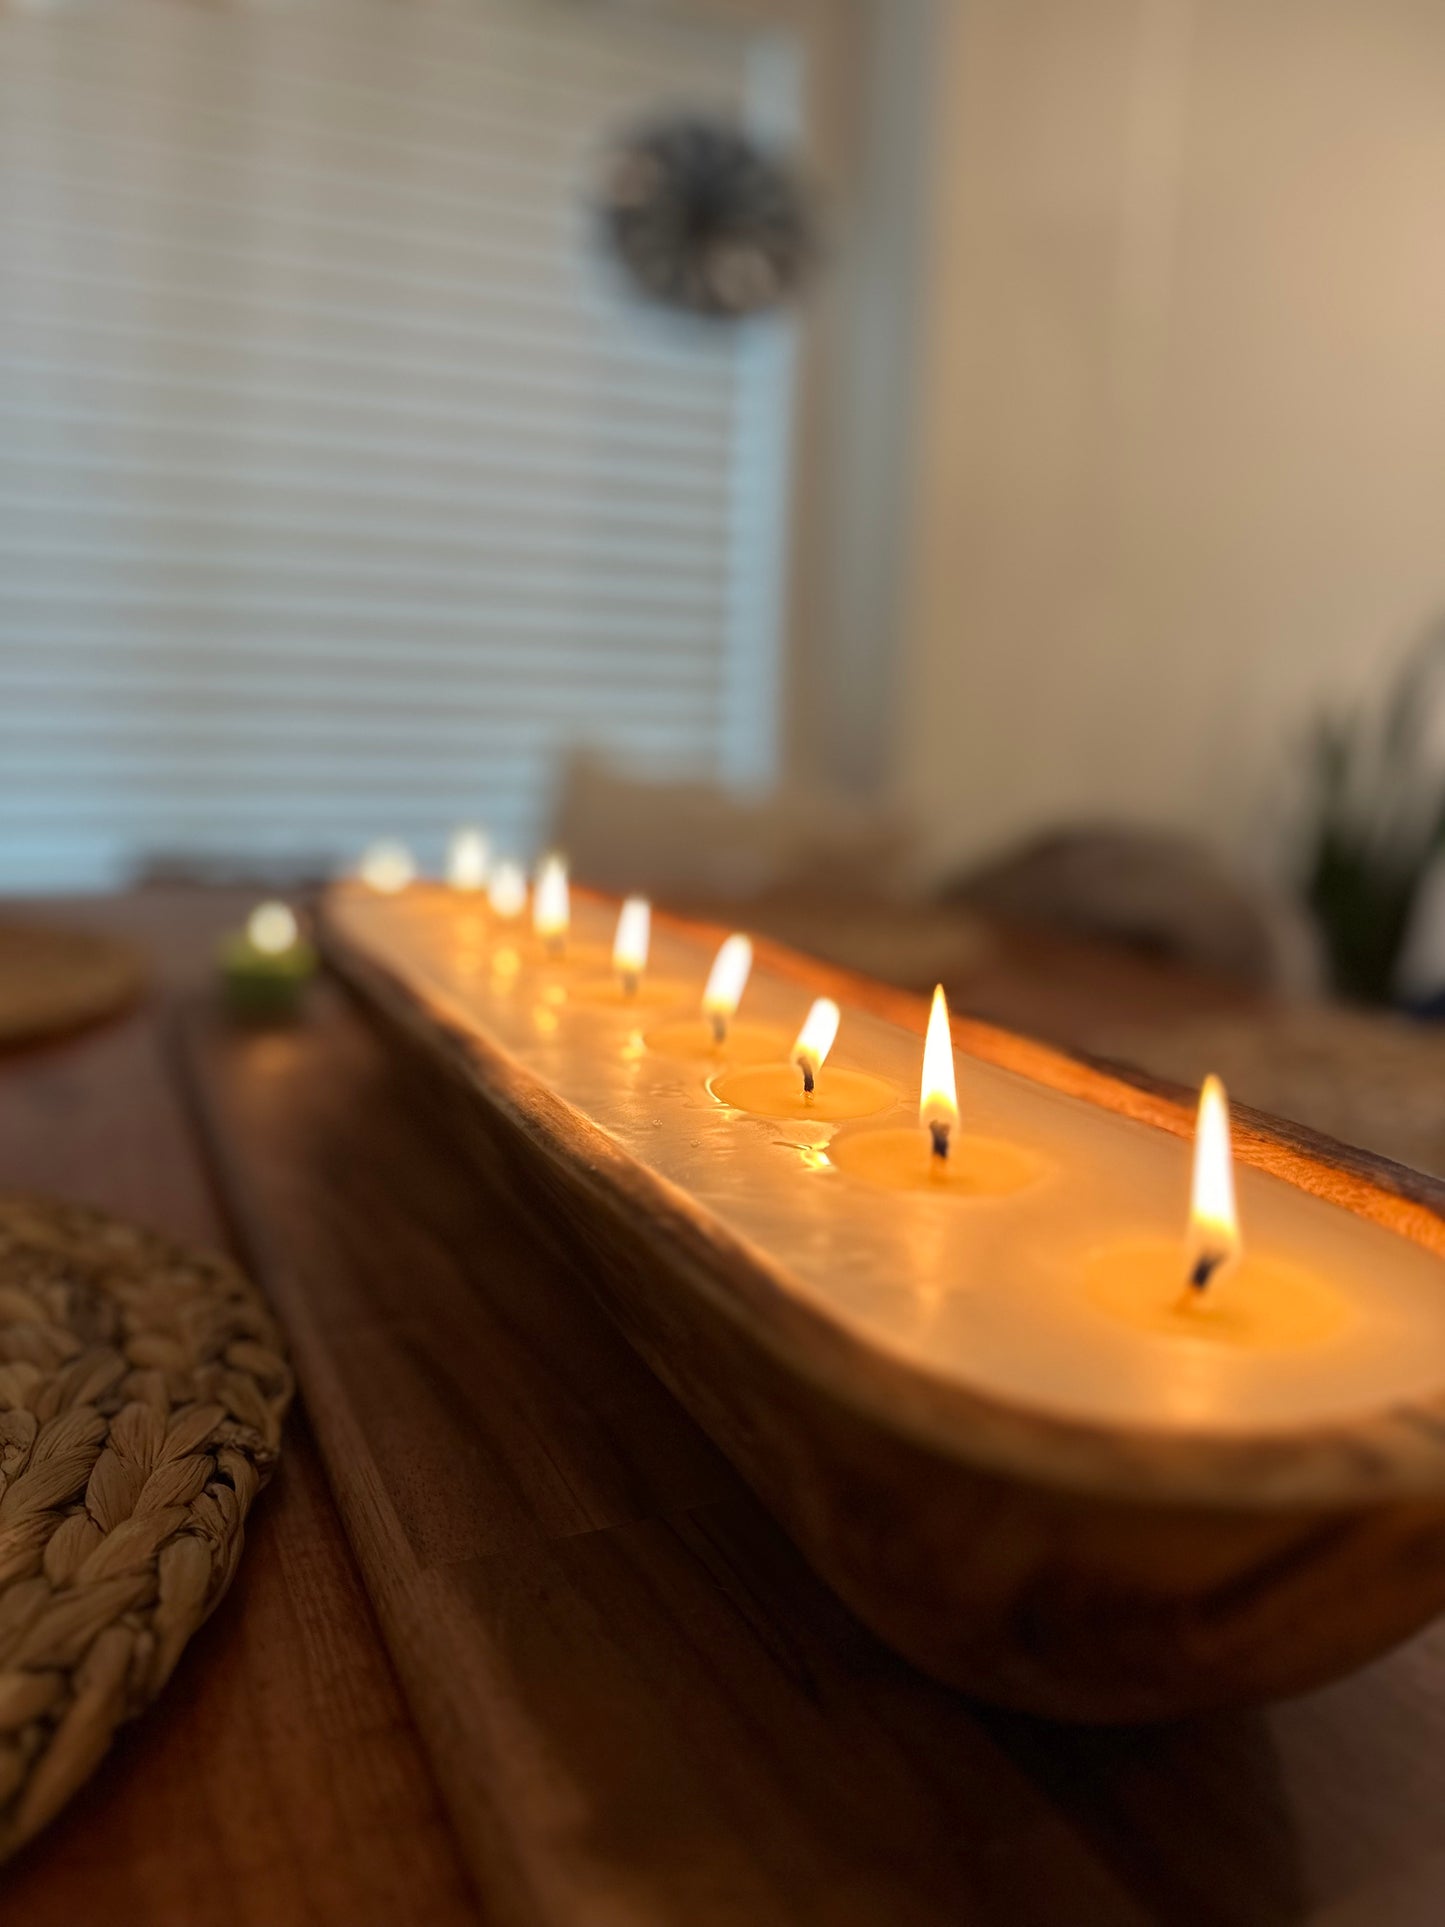 The Baguette | Small and Large Wood Dough Bowl Candles